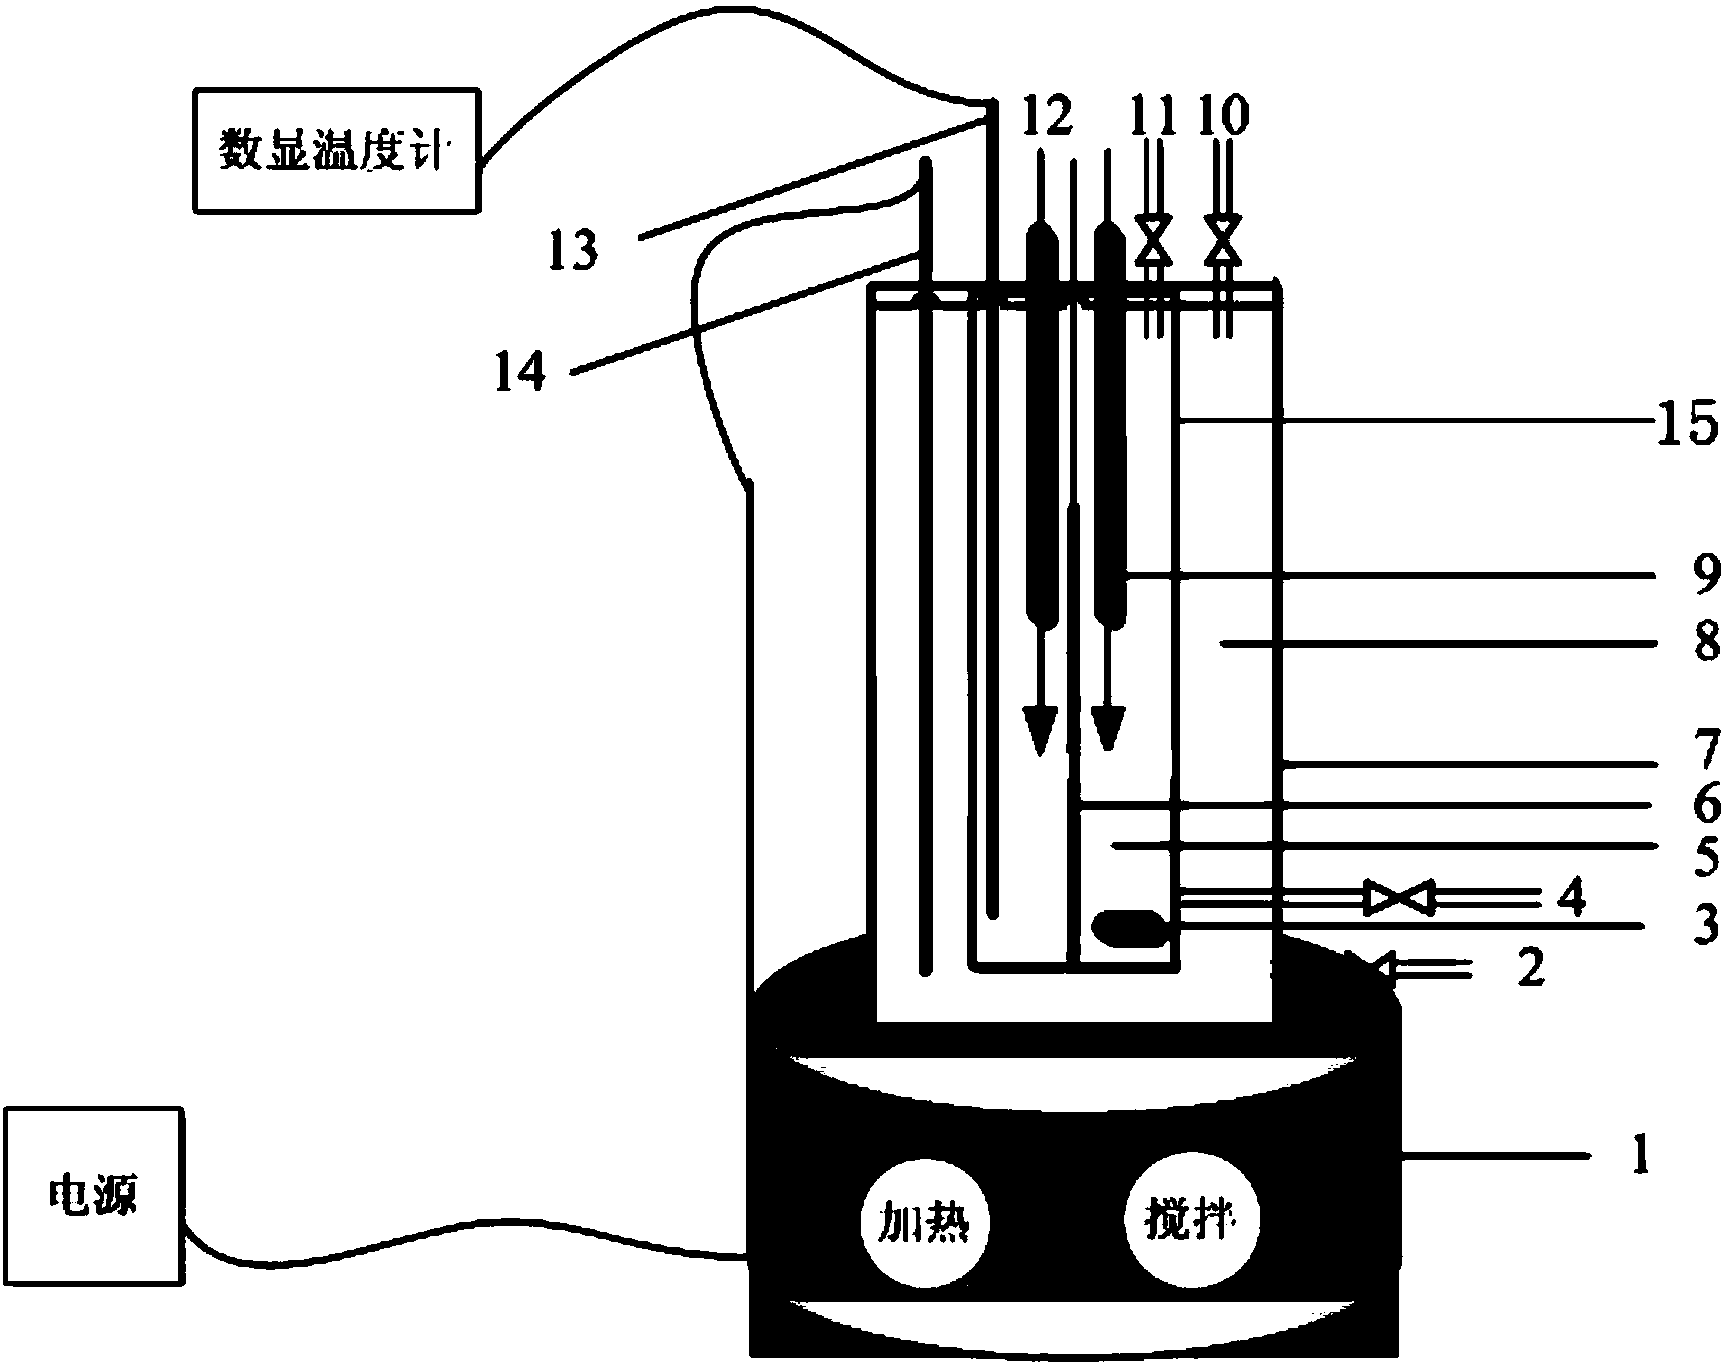 Experimental device for measuring chemical reaction rate and activation energy